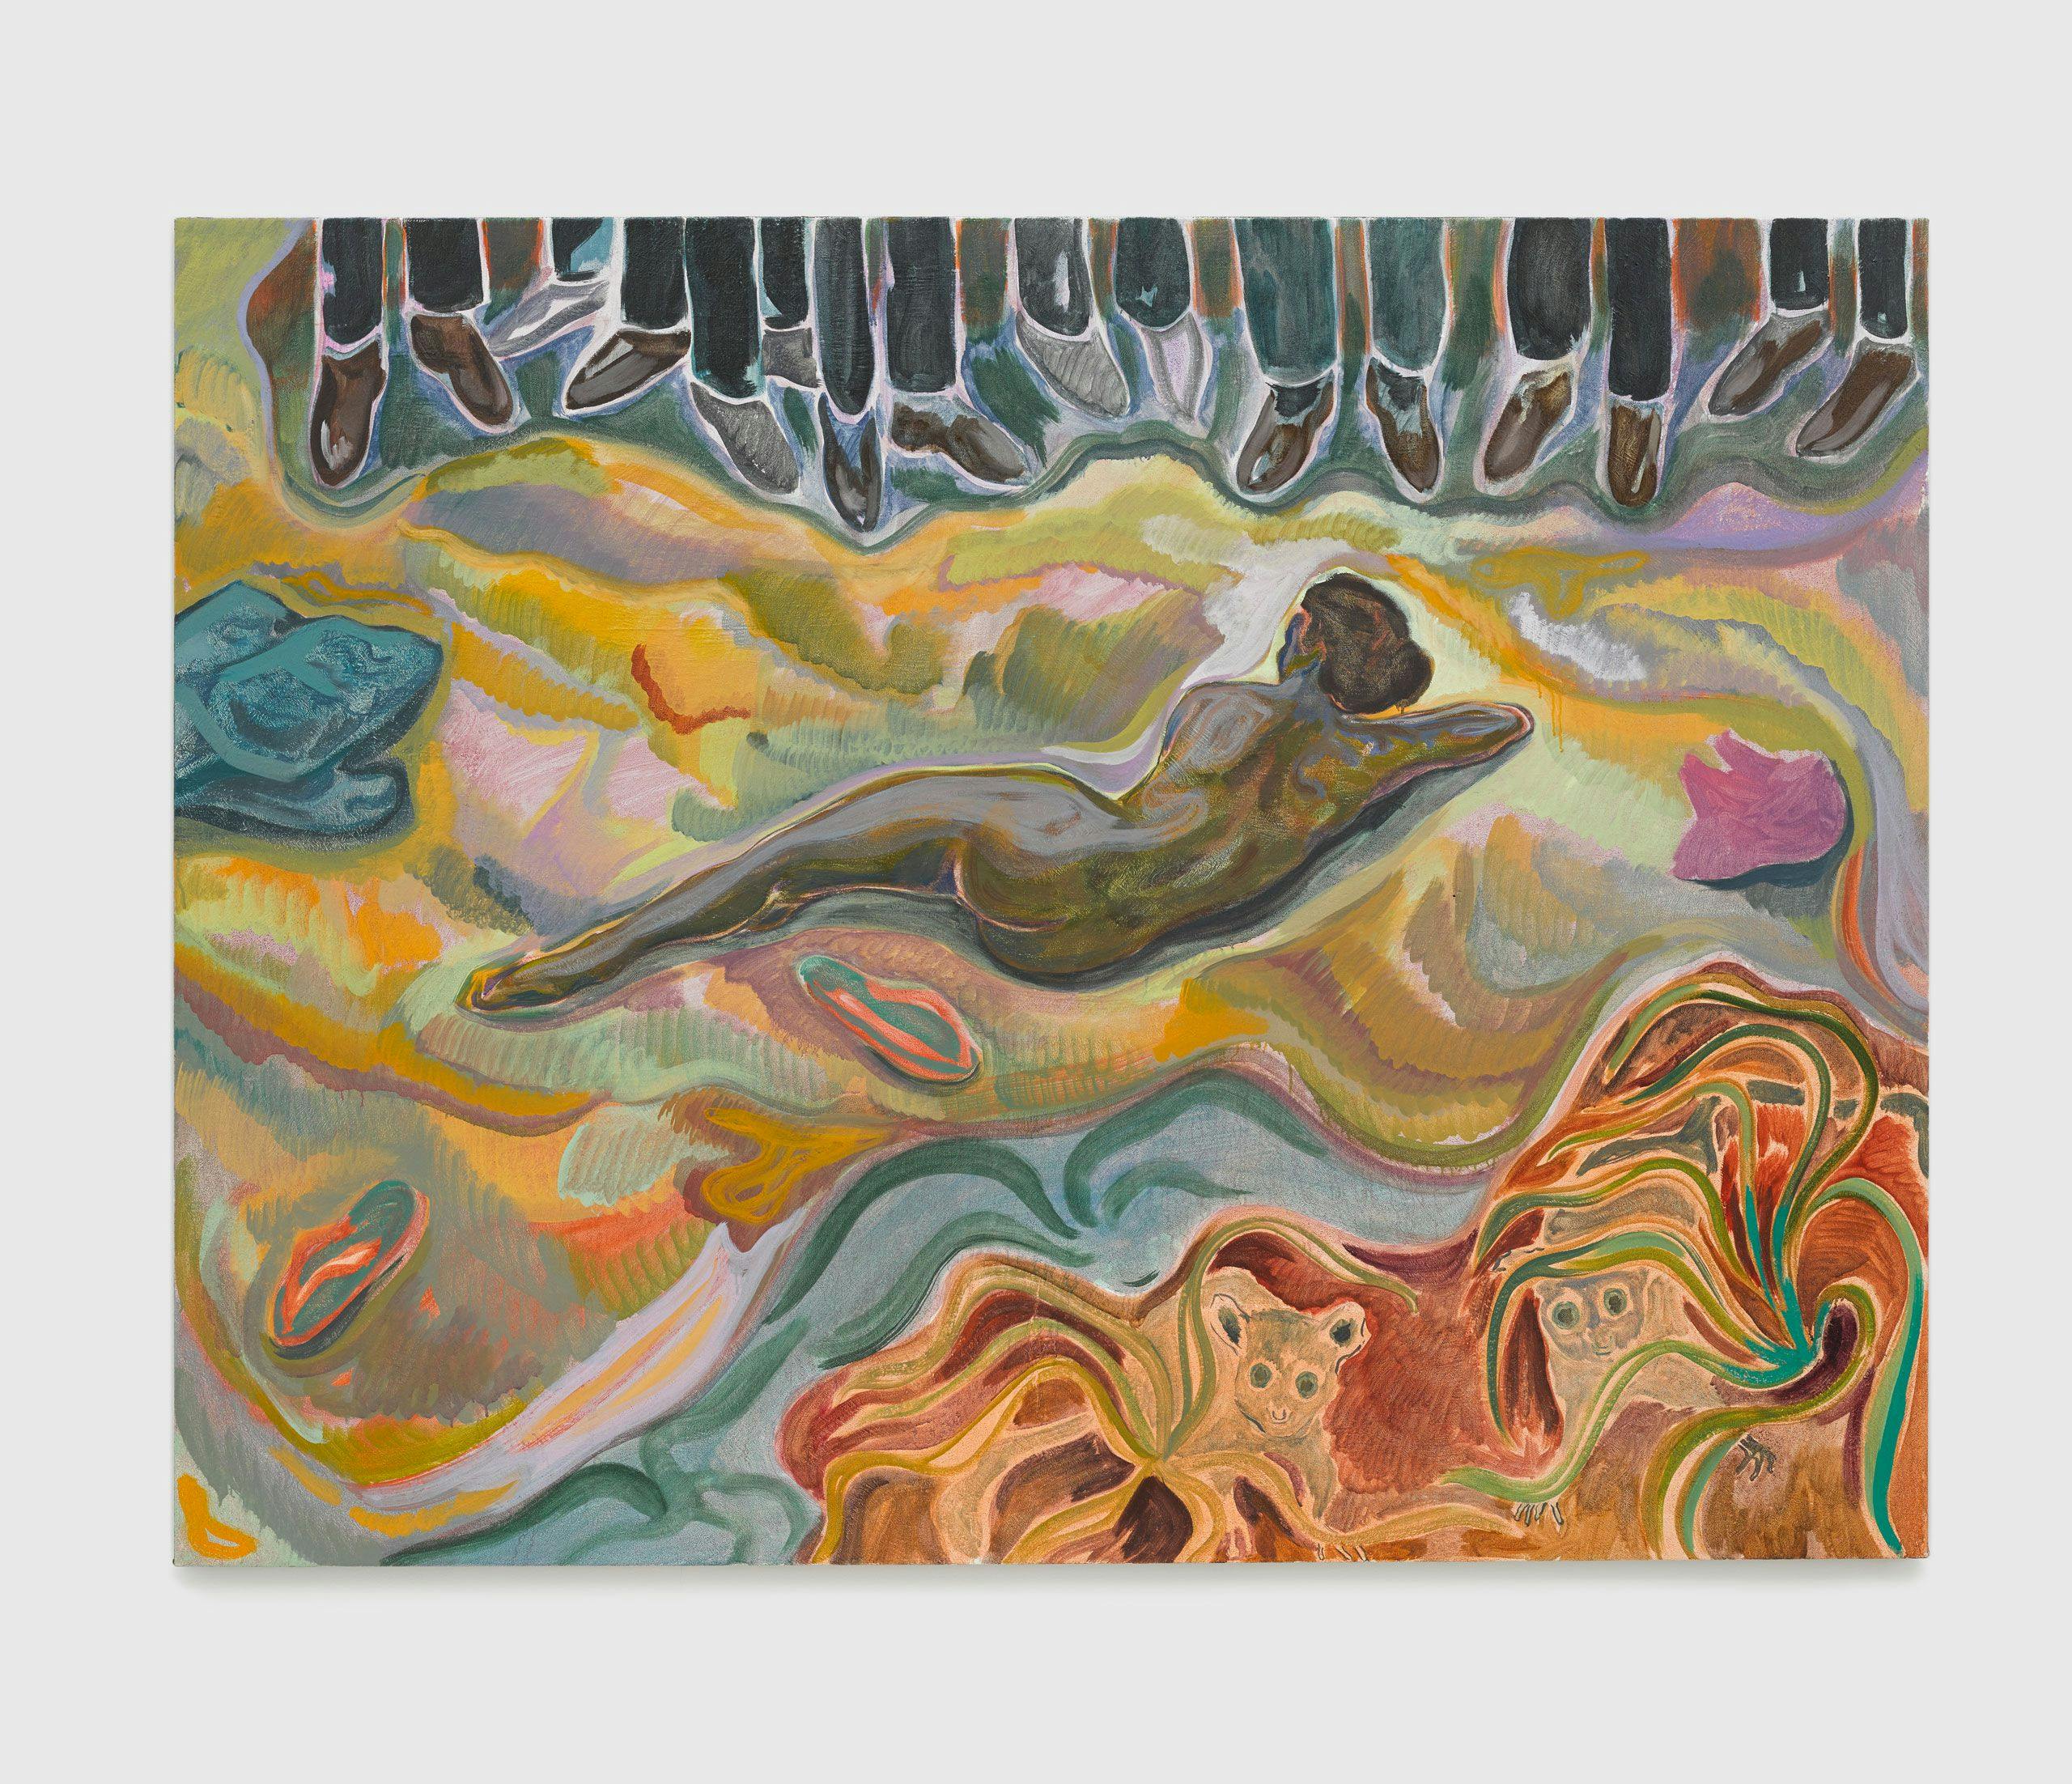 An oil on Lubugo bark cloth painting by Michael Armitage, titled #mydressmychoice, dated 2015.